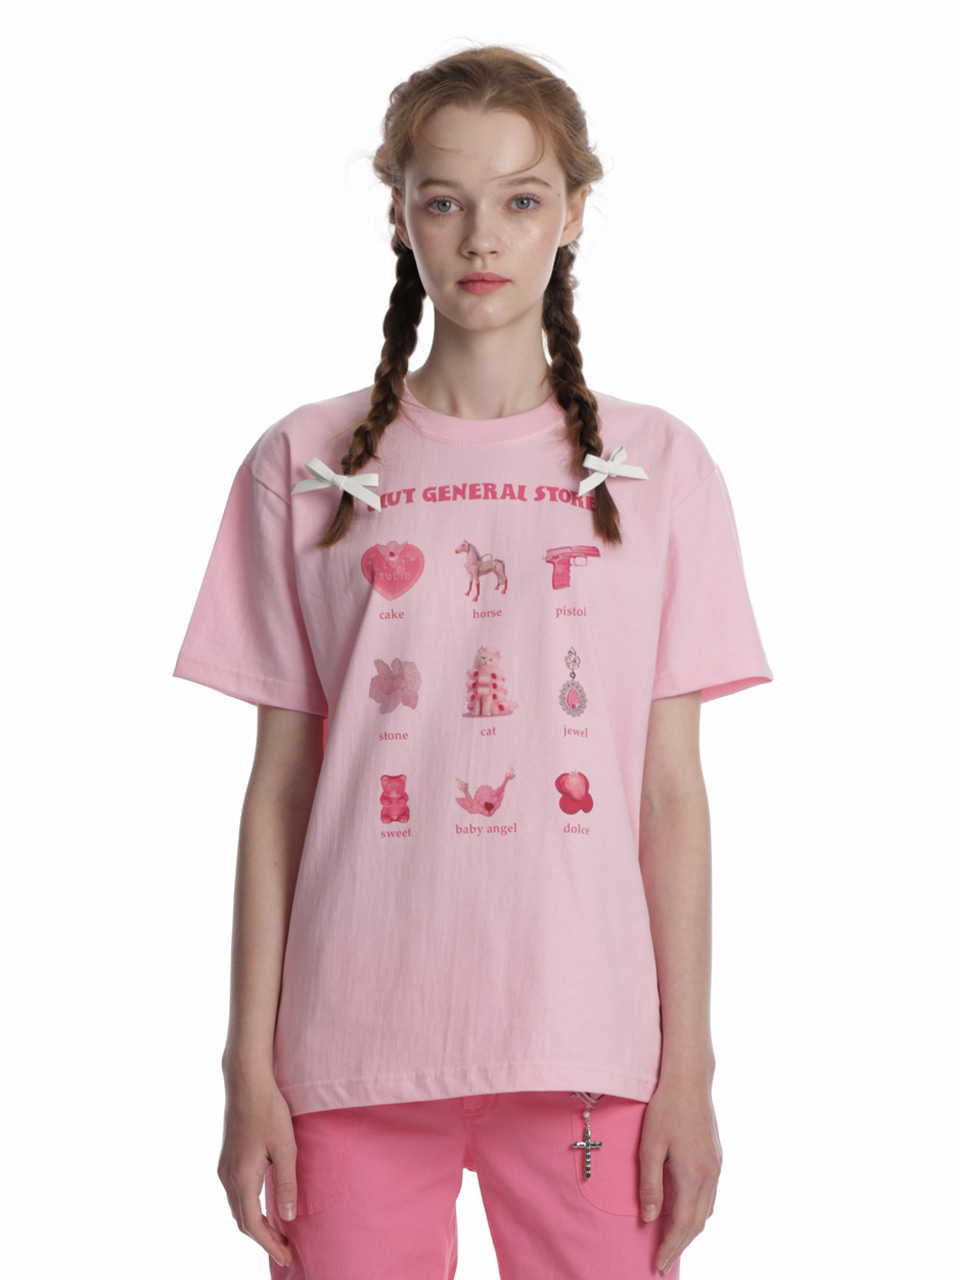 [sold out] 0 1 clut general store t-shirt - PINK